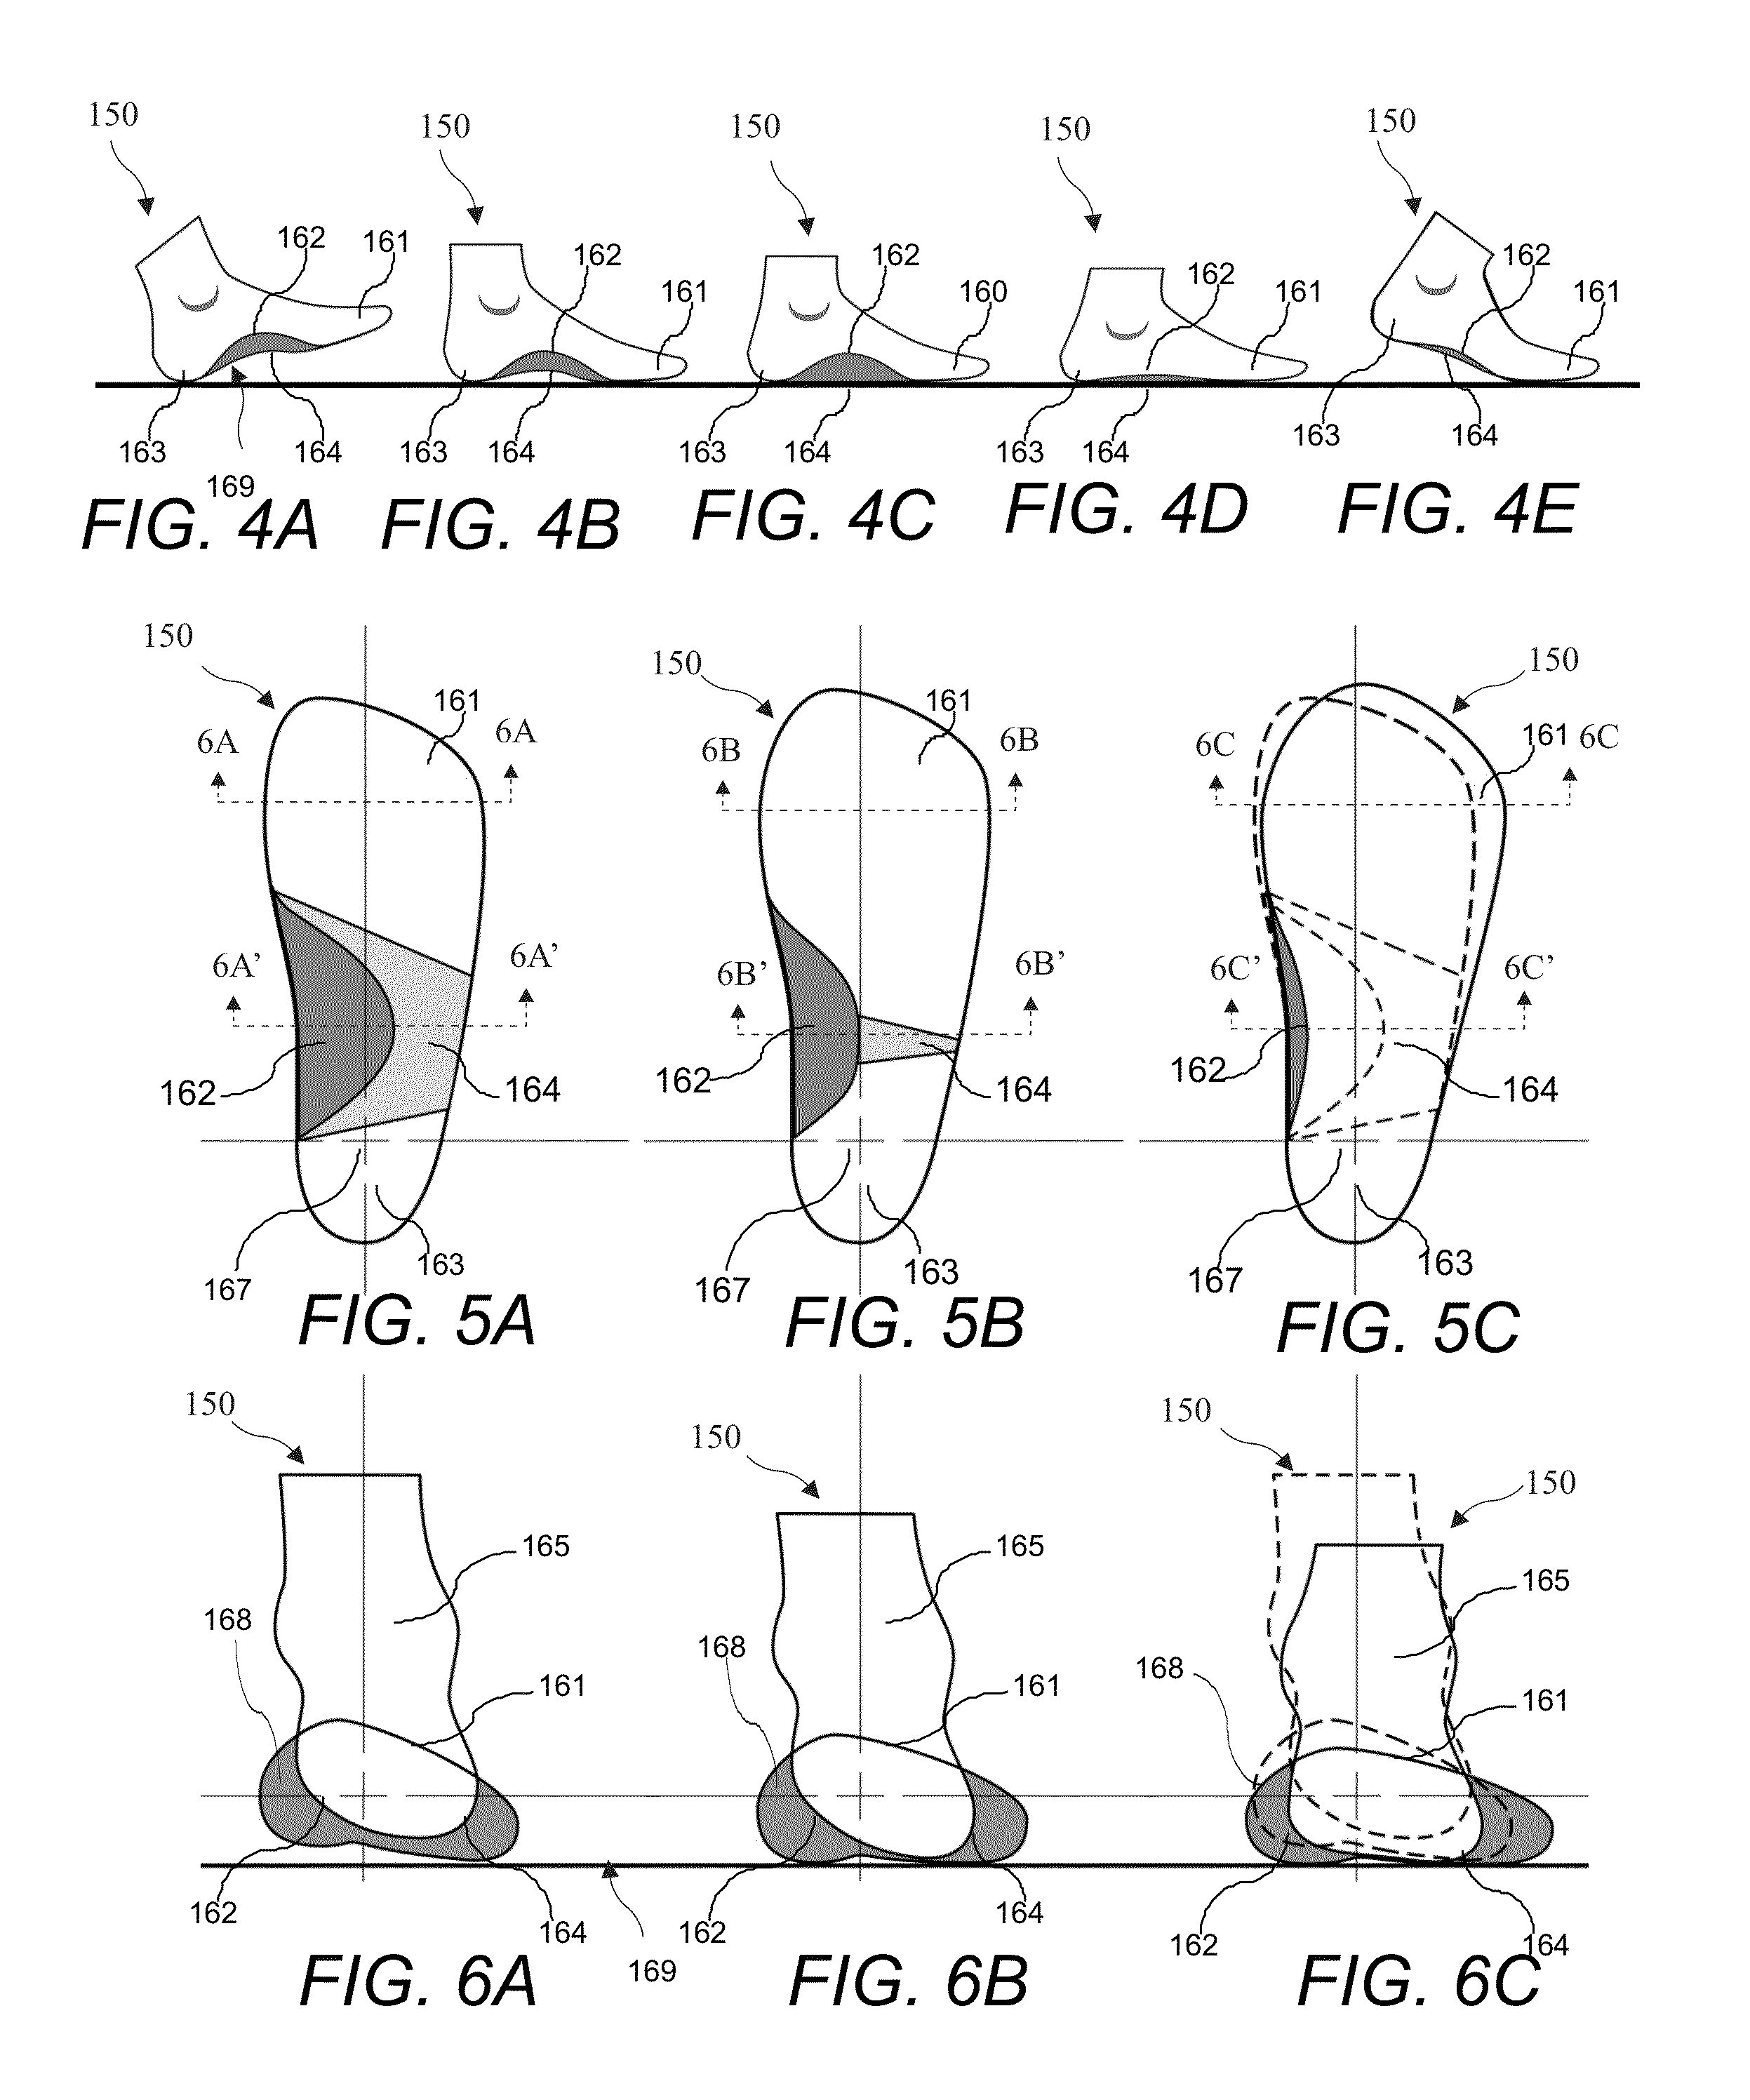 Article of Footwear with Embedded Orthotic Devices